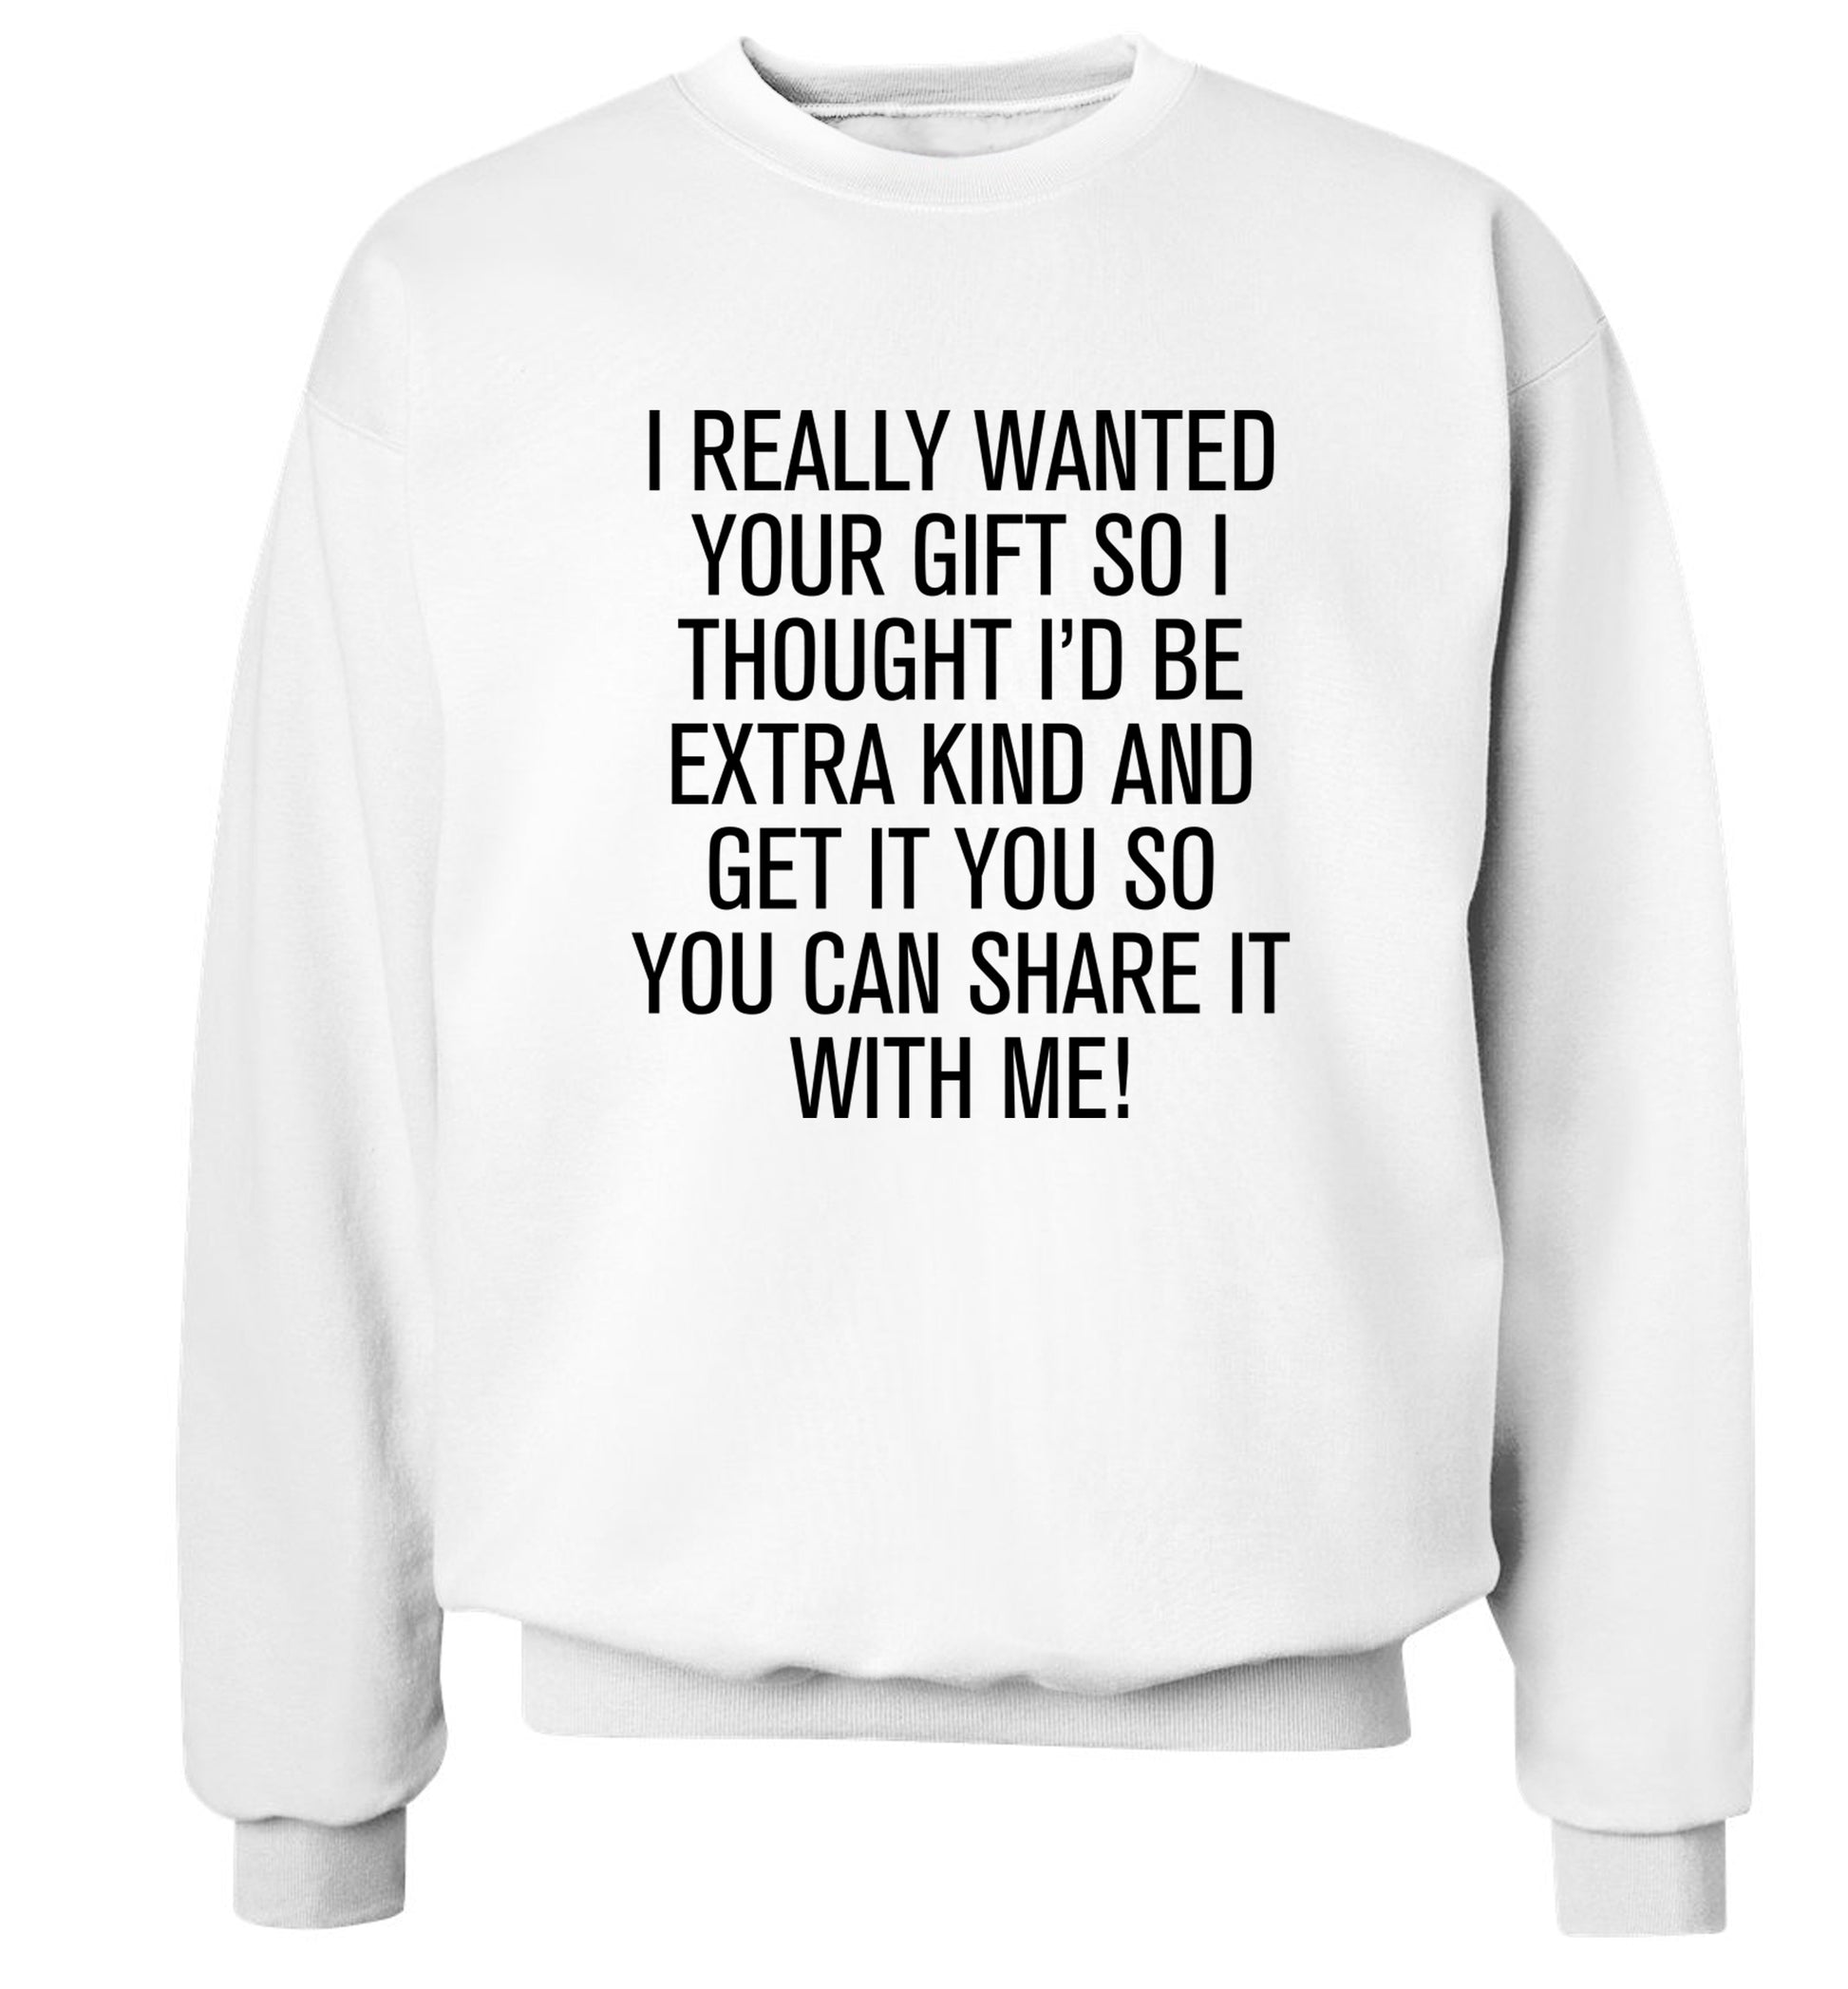 I really wanted your gift Adult's unisex white Sweater 2XL